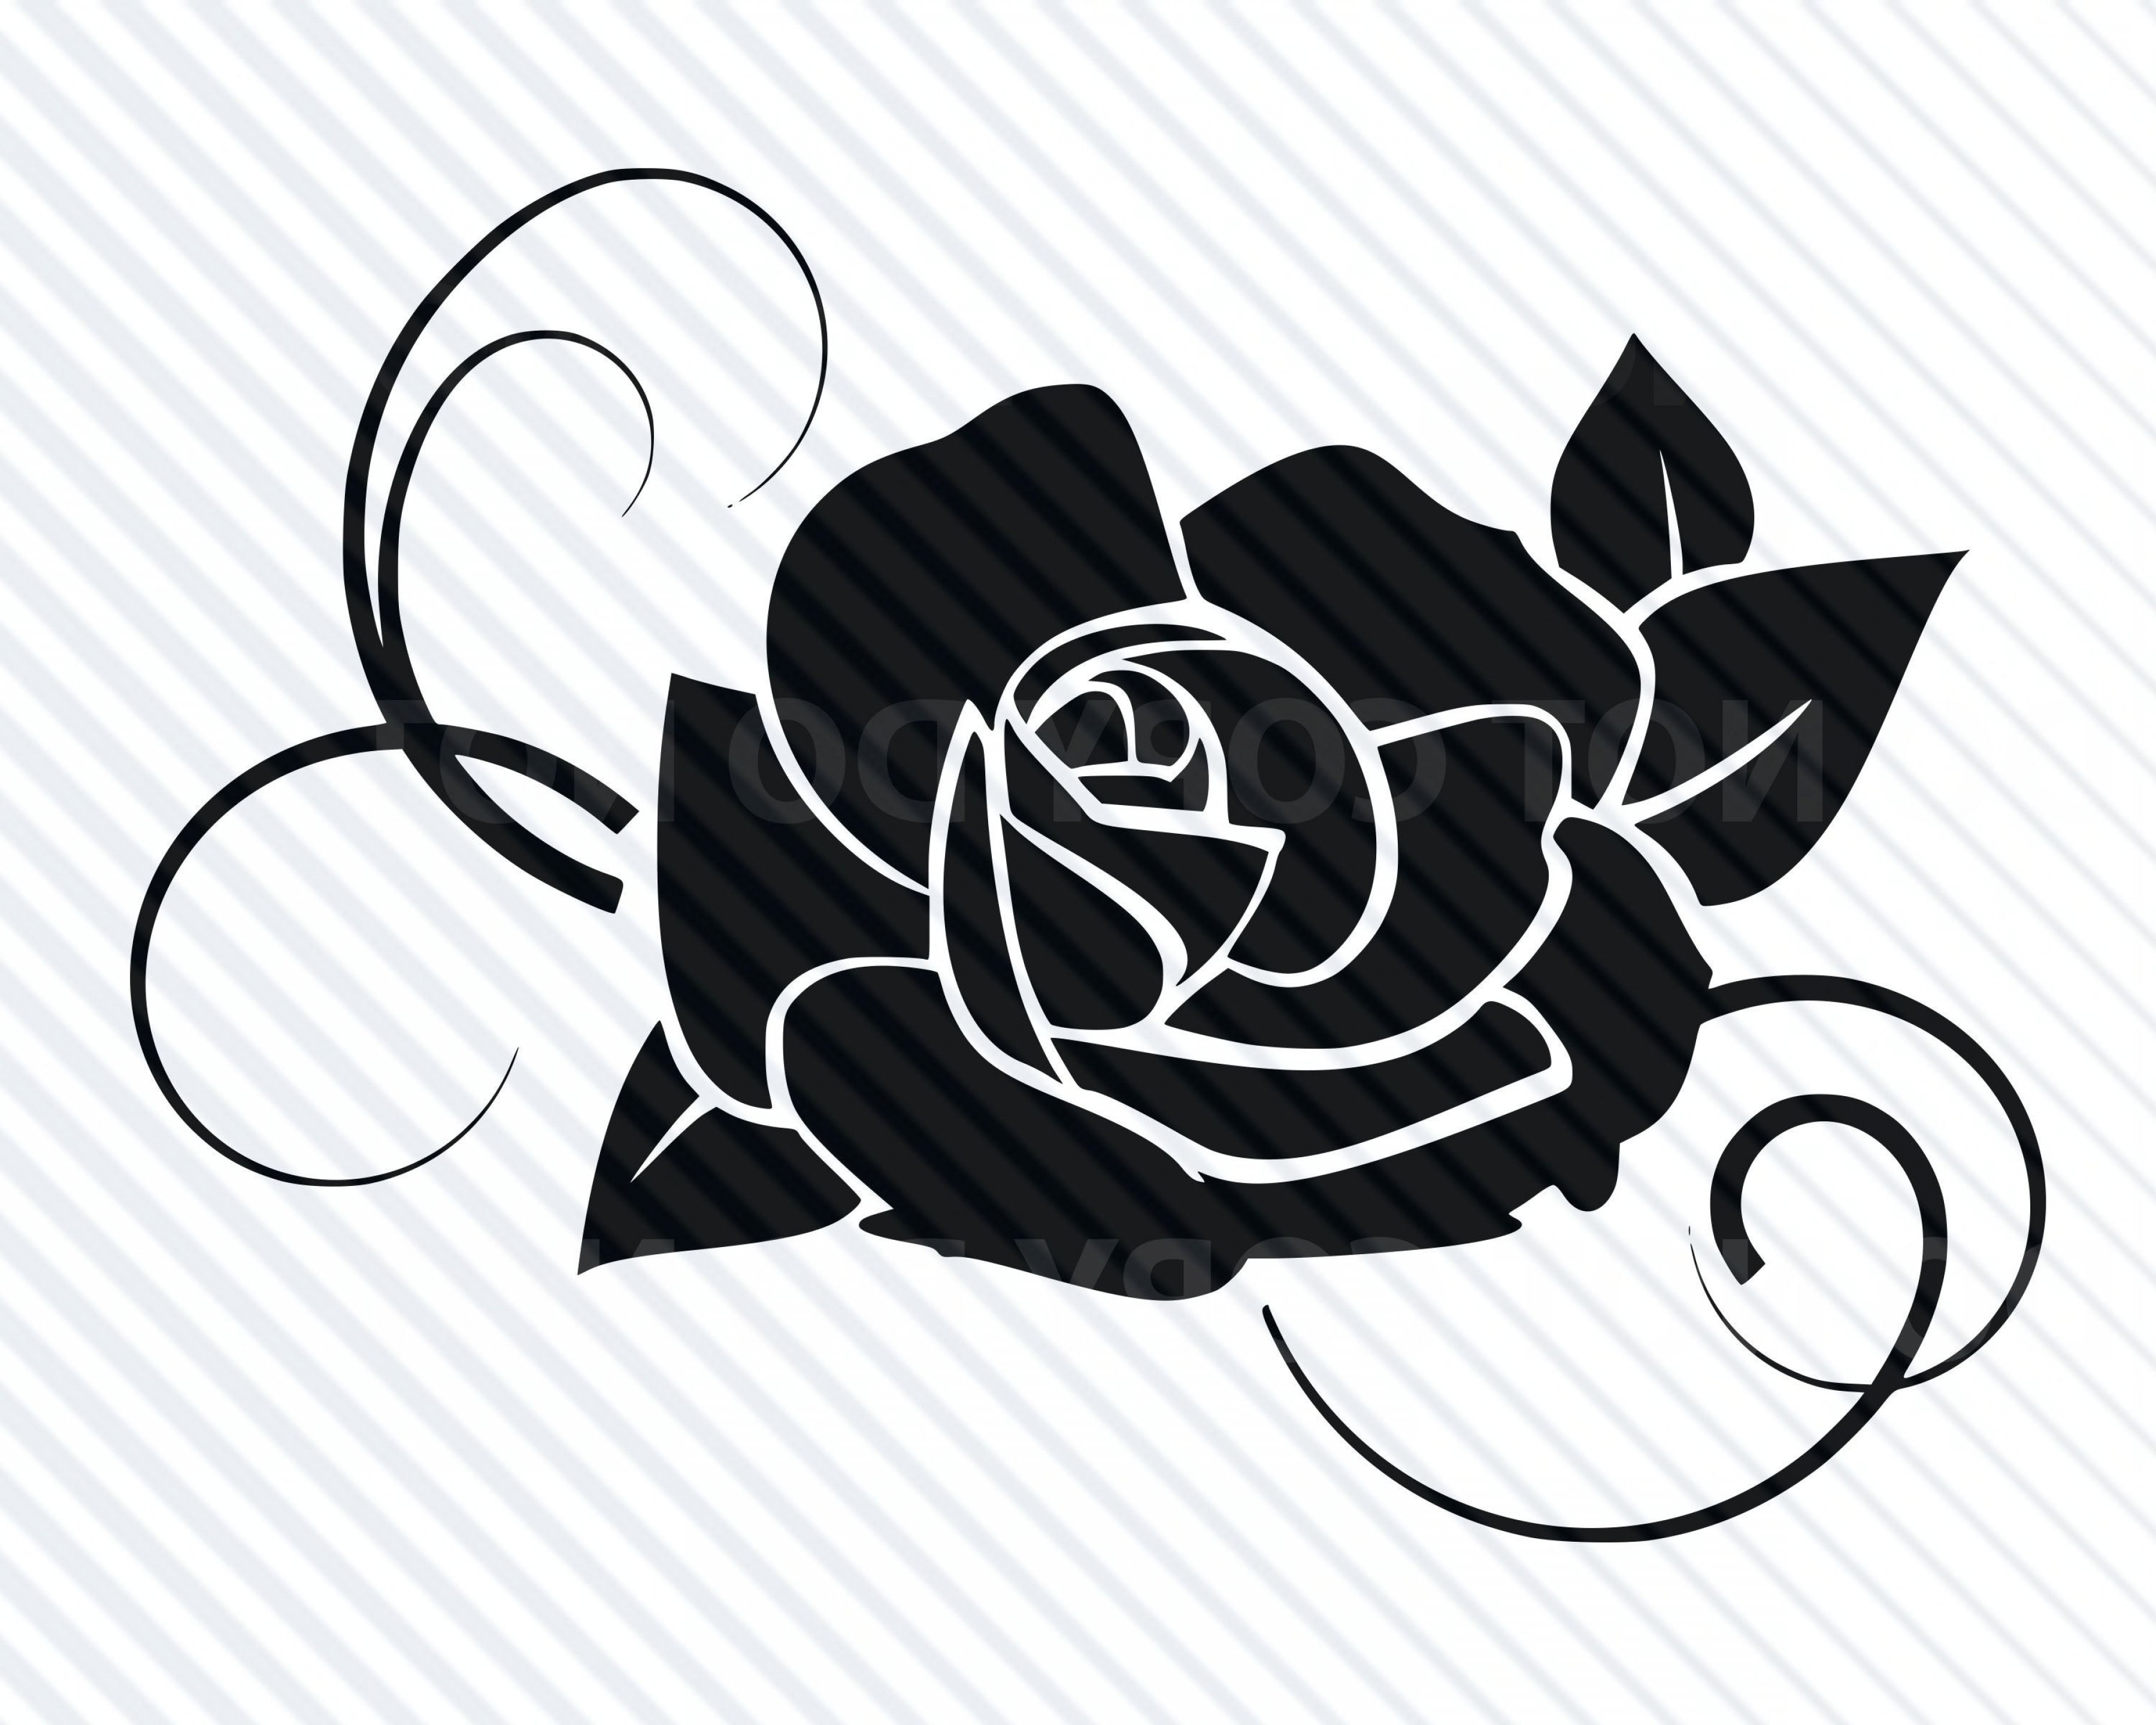 Black Rose Vector At Collection Of Black Rose Vector Free For Personal Use 3723